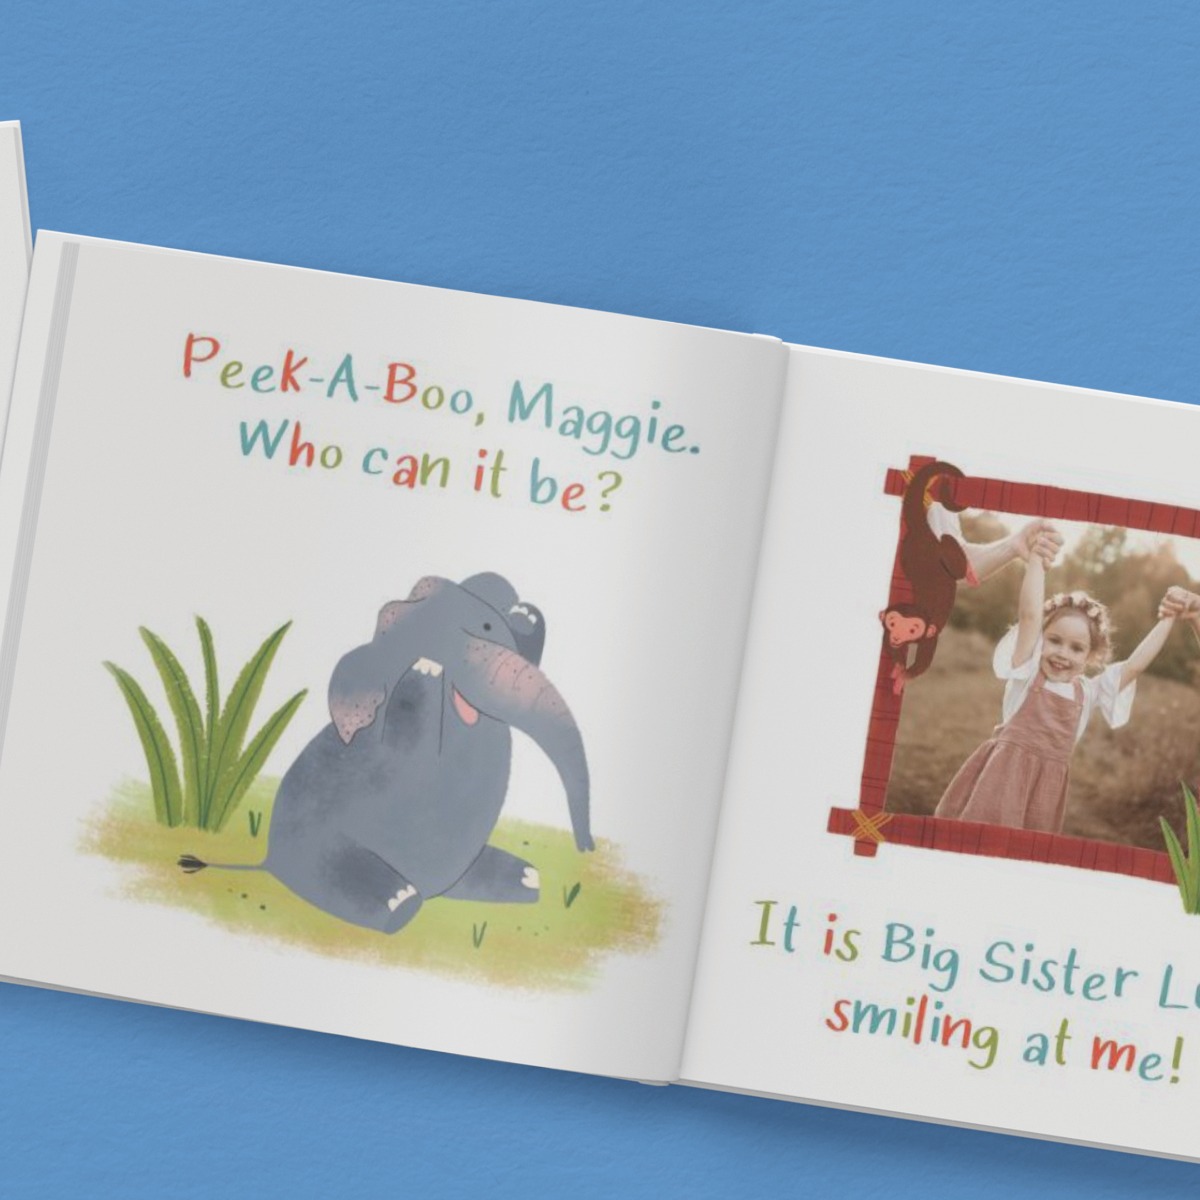 Best Baby Photo Albums  Baby's First Birthday Photo Books - Picsy